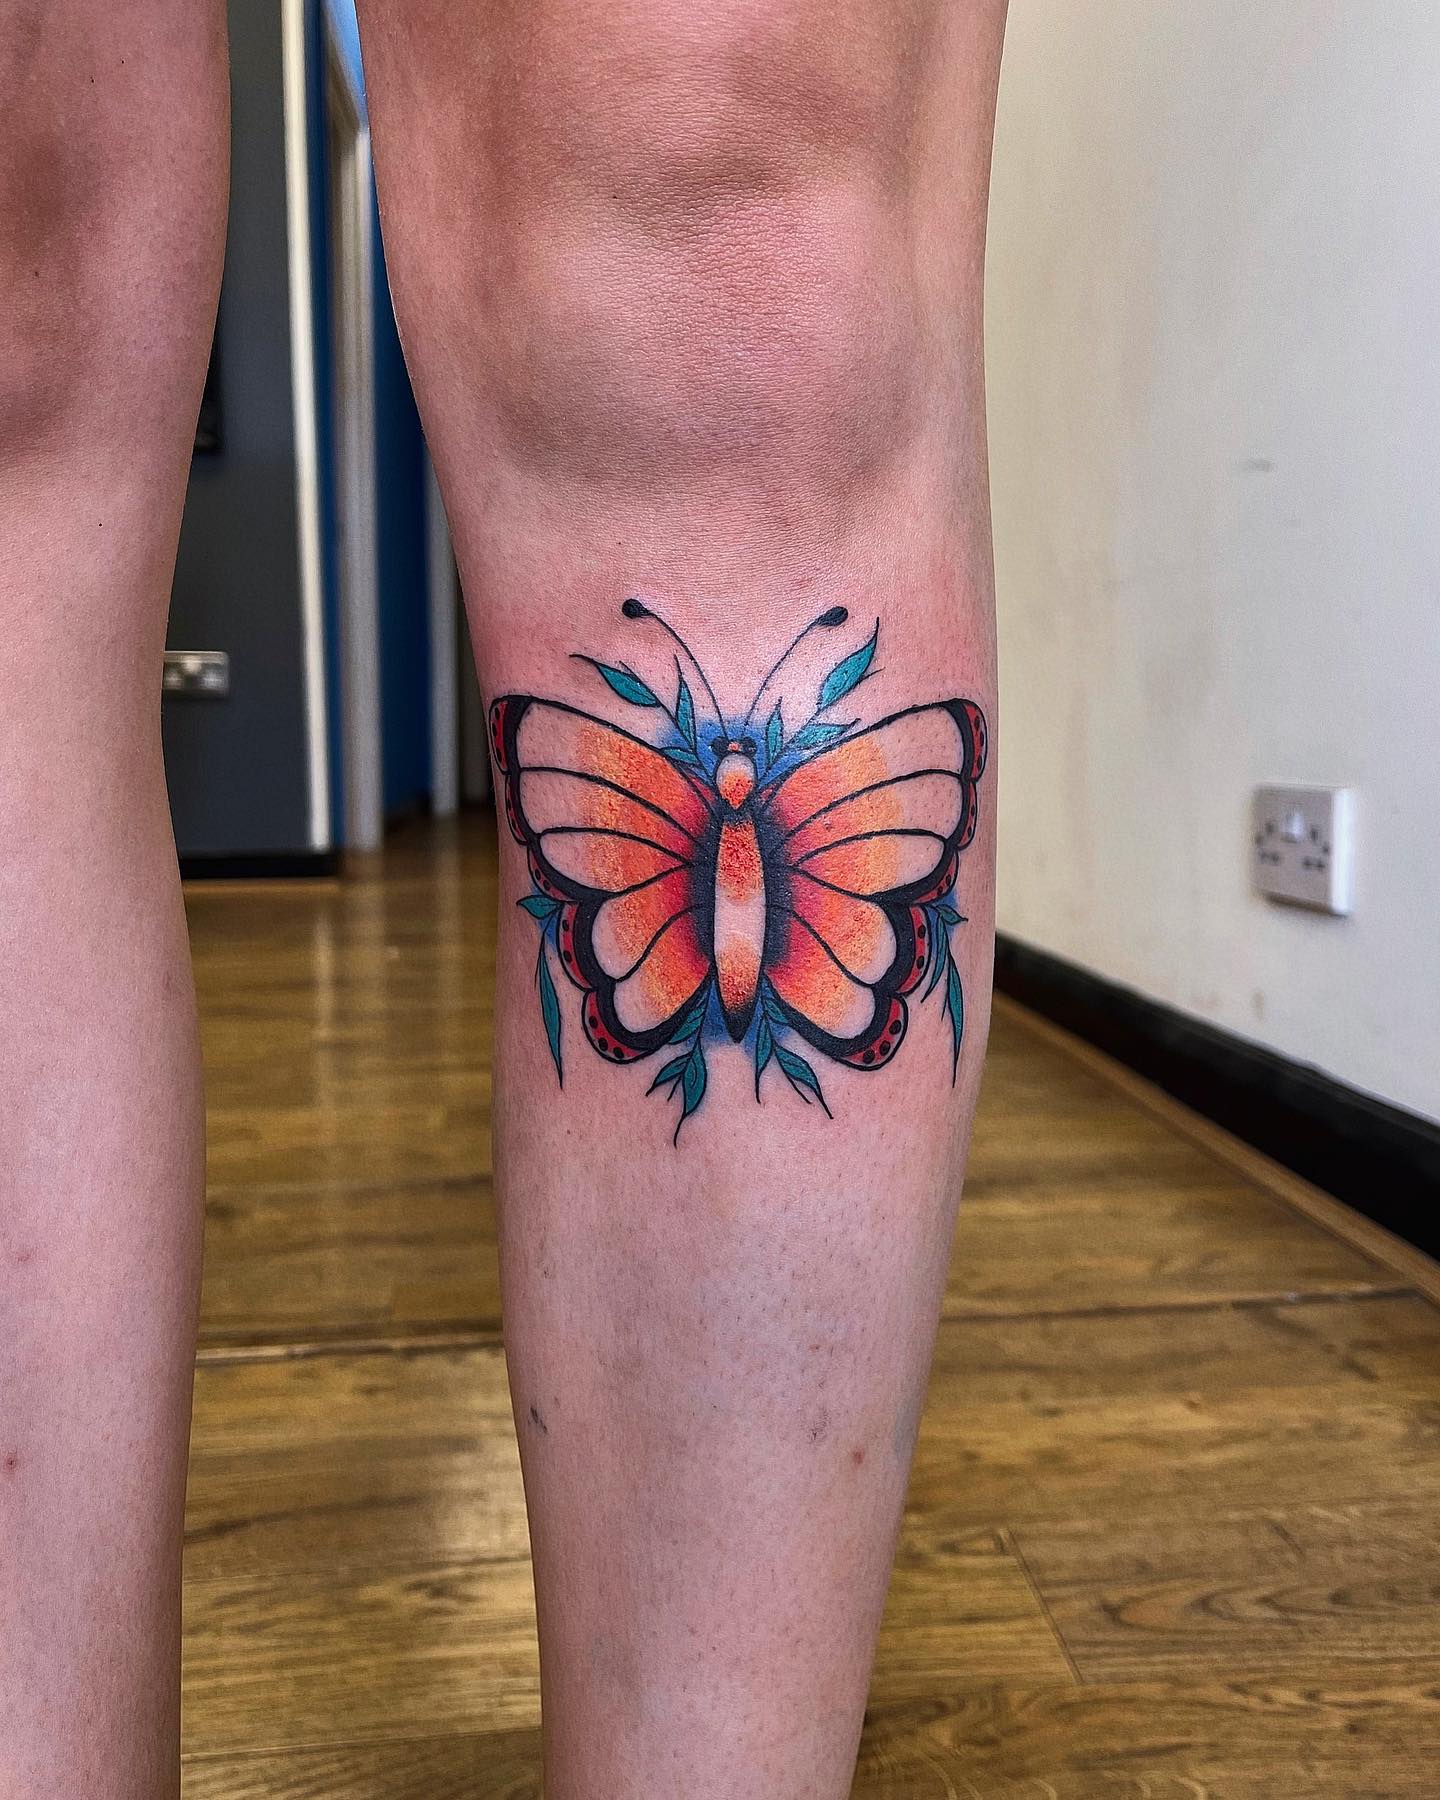 Lastly, how about this butterfly tattoo instead of a Pokemon Butterfree design? This knee print symbolizes fun paths that you’re willing to take in life, as well as your fun and bubbly personality.